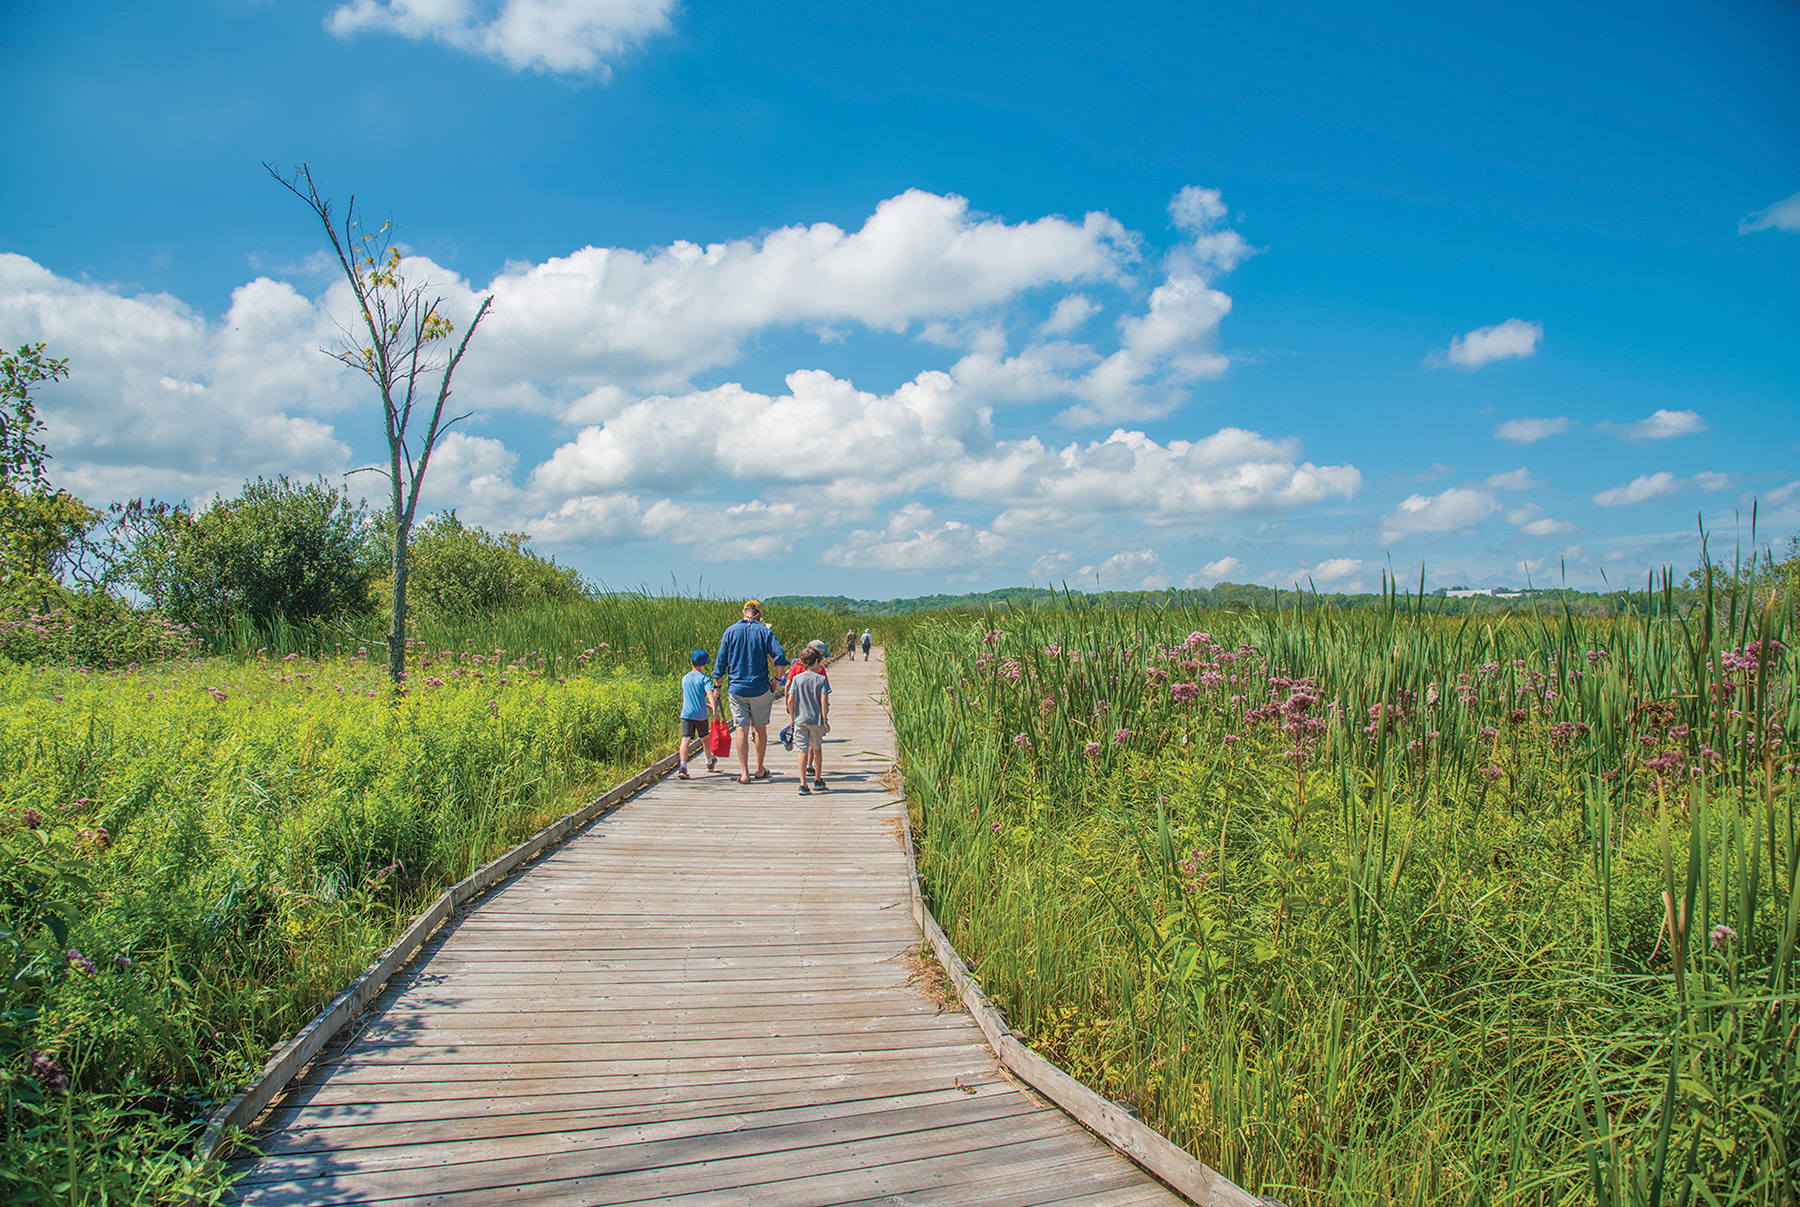 The Wye Marsh Wildlife Centre in Midland features trails, boardwalks and paddling routes through 3,000 acres of Provincially Significant Wetlands.